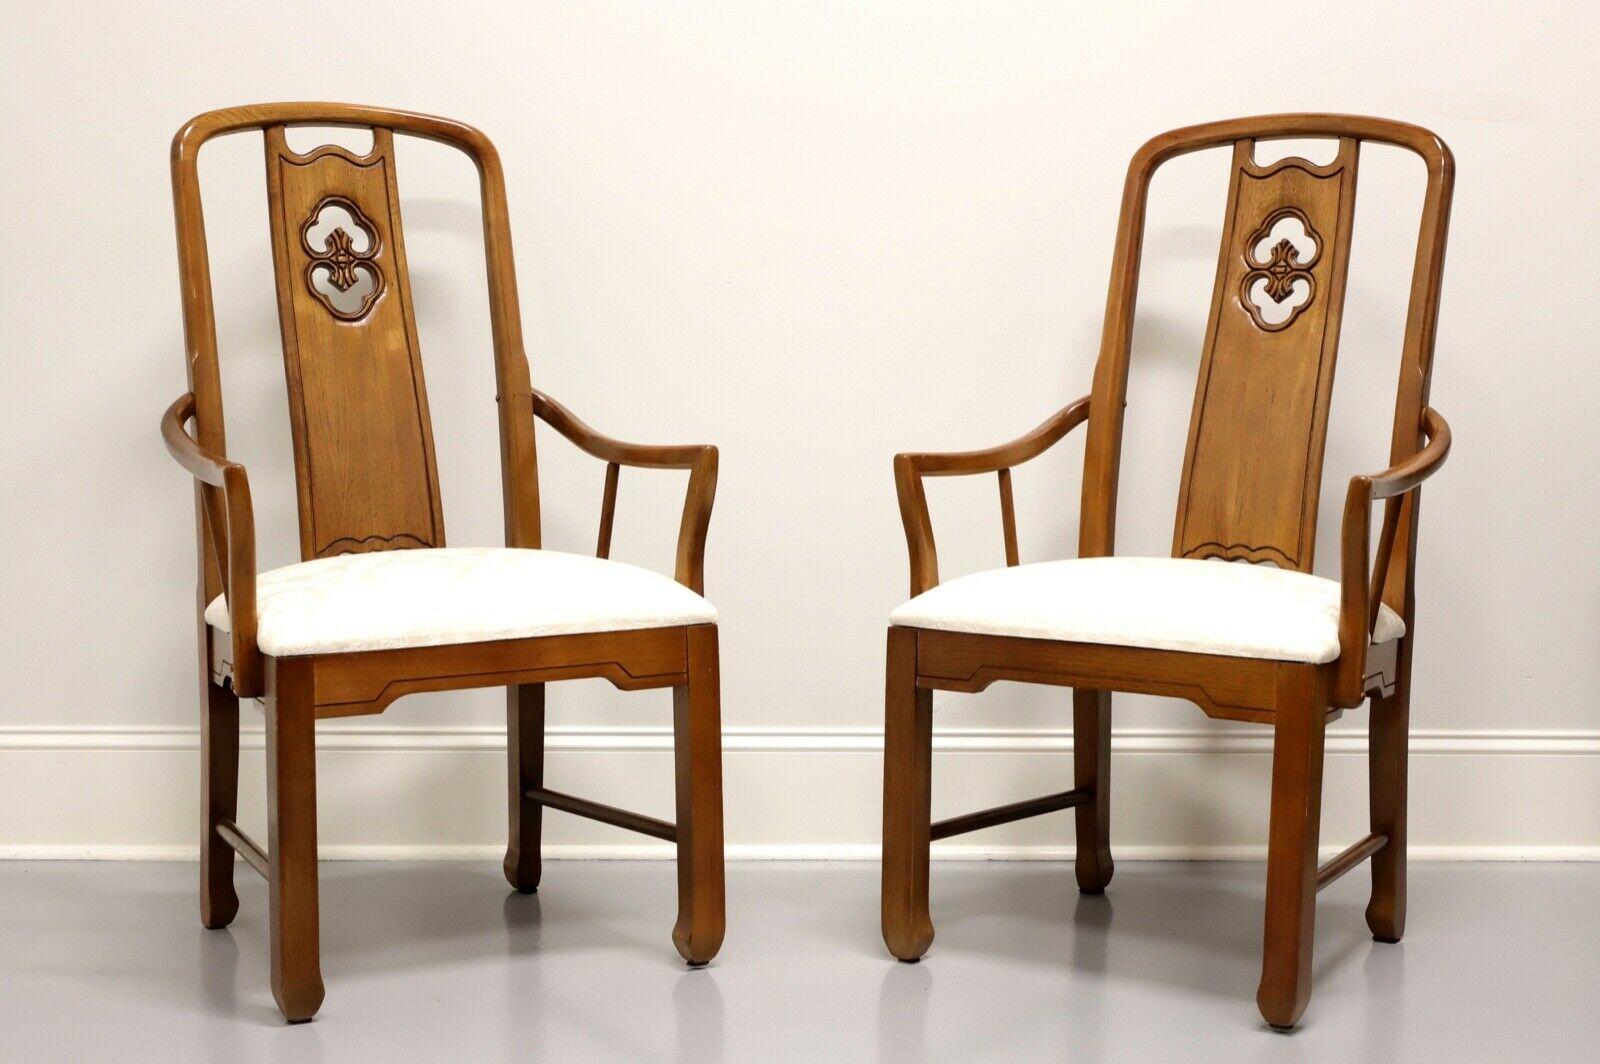 THOMASVILLE Mystique Asian Chinoiserie Dining Captain's Armchairs - Pair 5